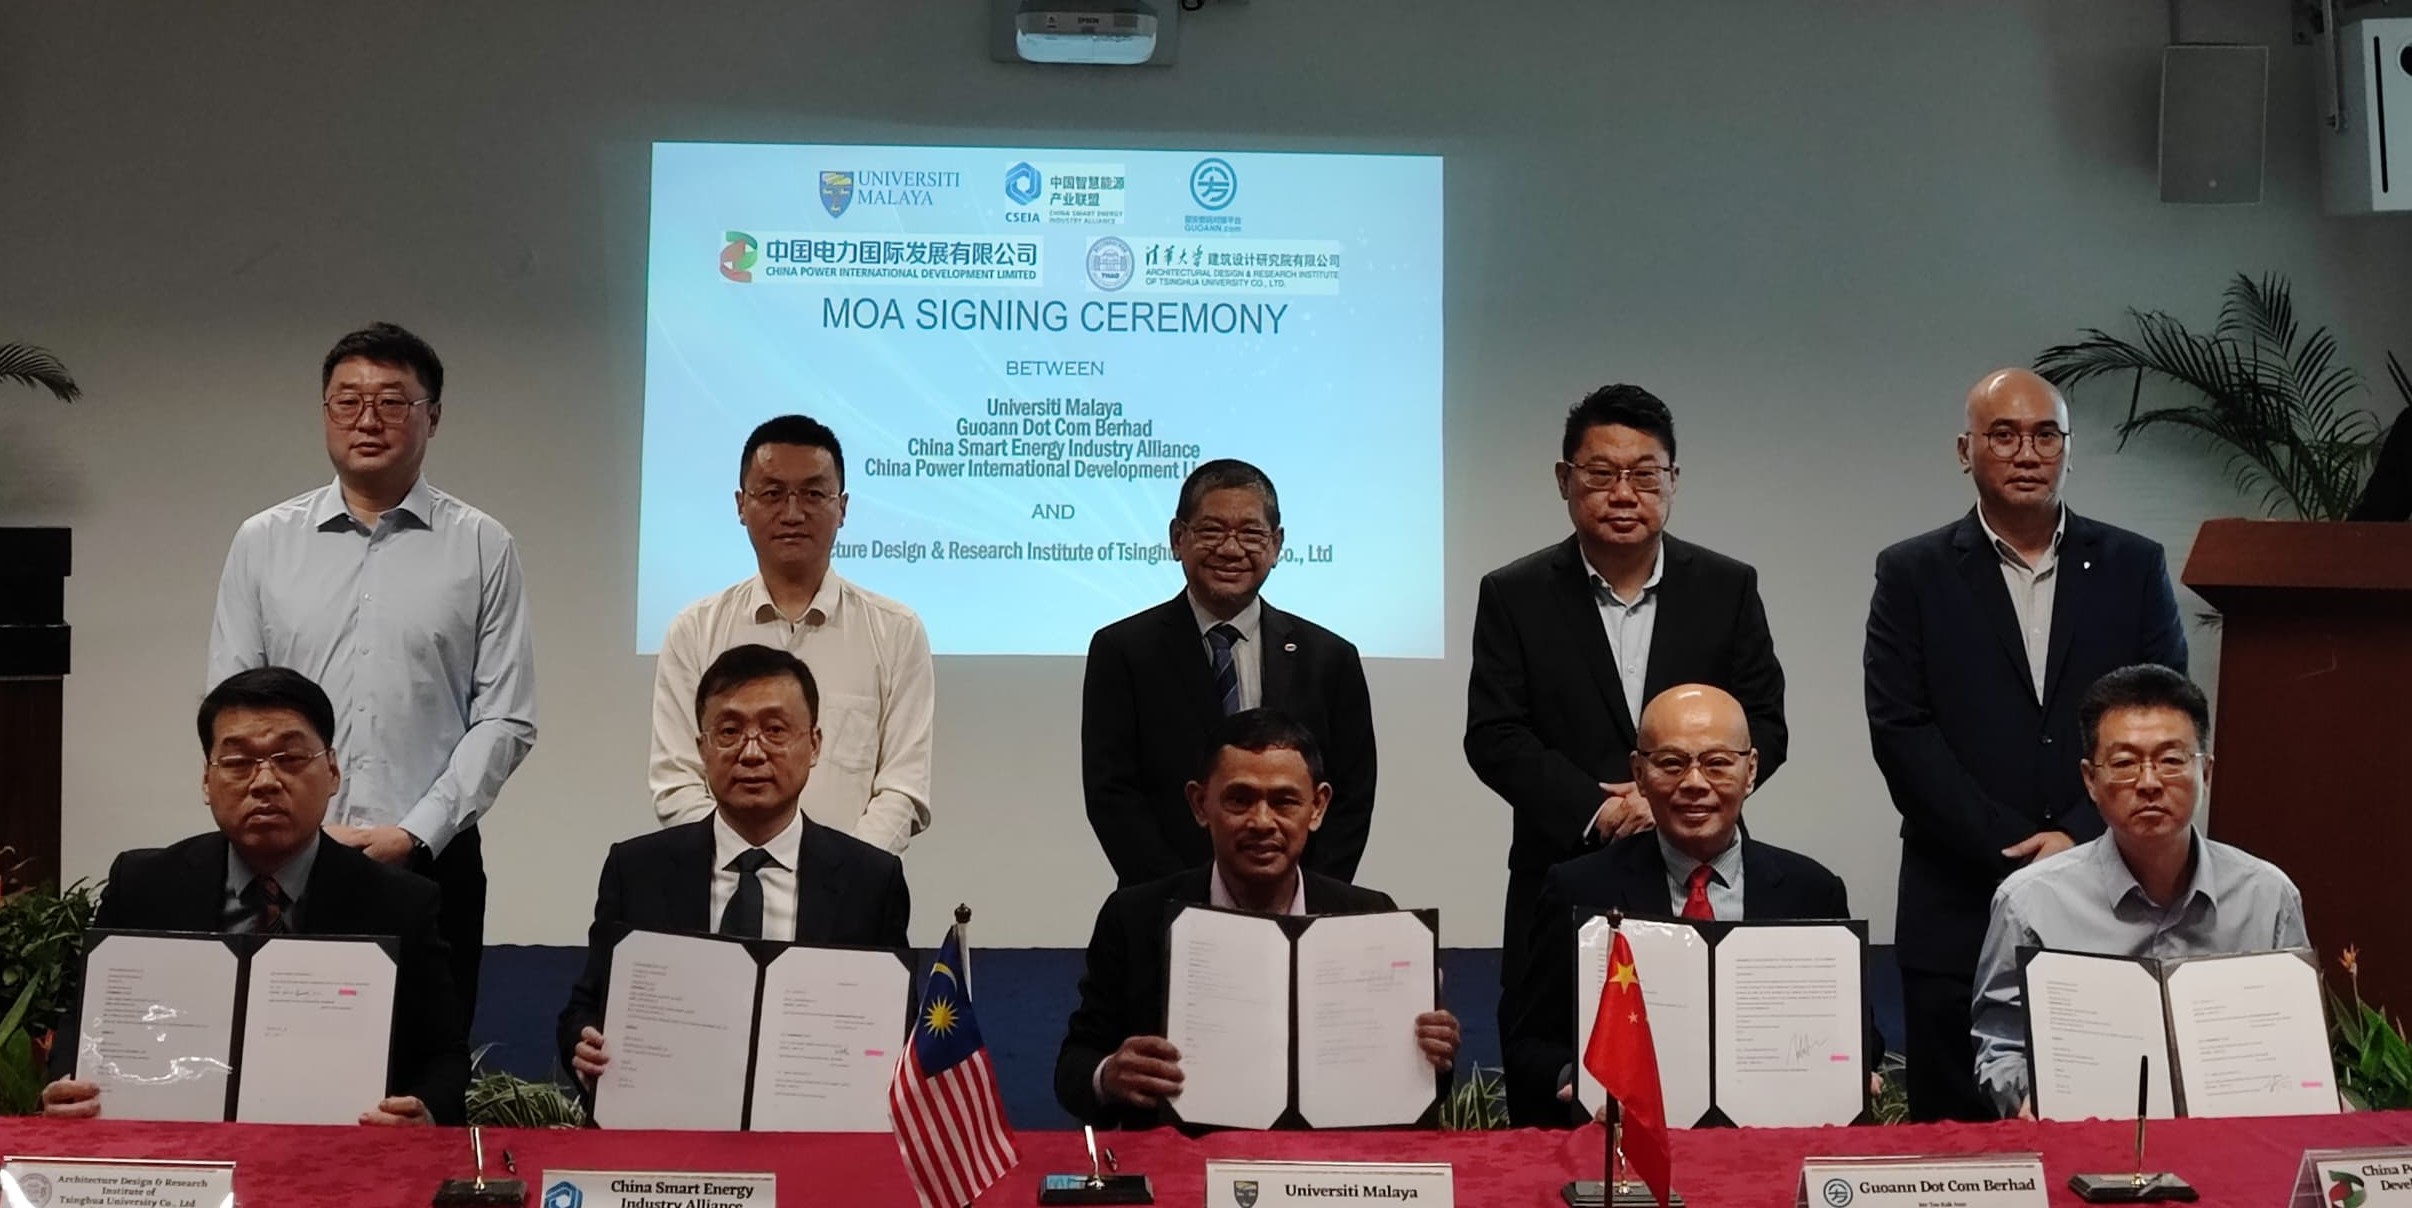 (From left) Professor Borong Lin - Deputy Dean School of Architecture of Architecture Design & Research Institute of Tsinghua University, Mr. Shi Chun - Vice Chairman of China Smart Energy Industry Alliance, Professor Ir. Dr. Kaharudin Dimyati - acting as the representative of Universiti Malaya Vice Chanselor, Mr. Teo Kok Ann - CEO of Guoann Dot Com Berhad and Mr. Lu Xiang – Deputy General Manager of China Power International Development Limited.